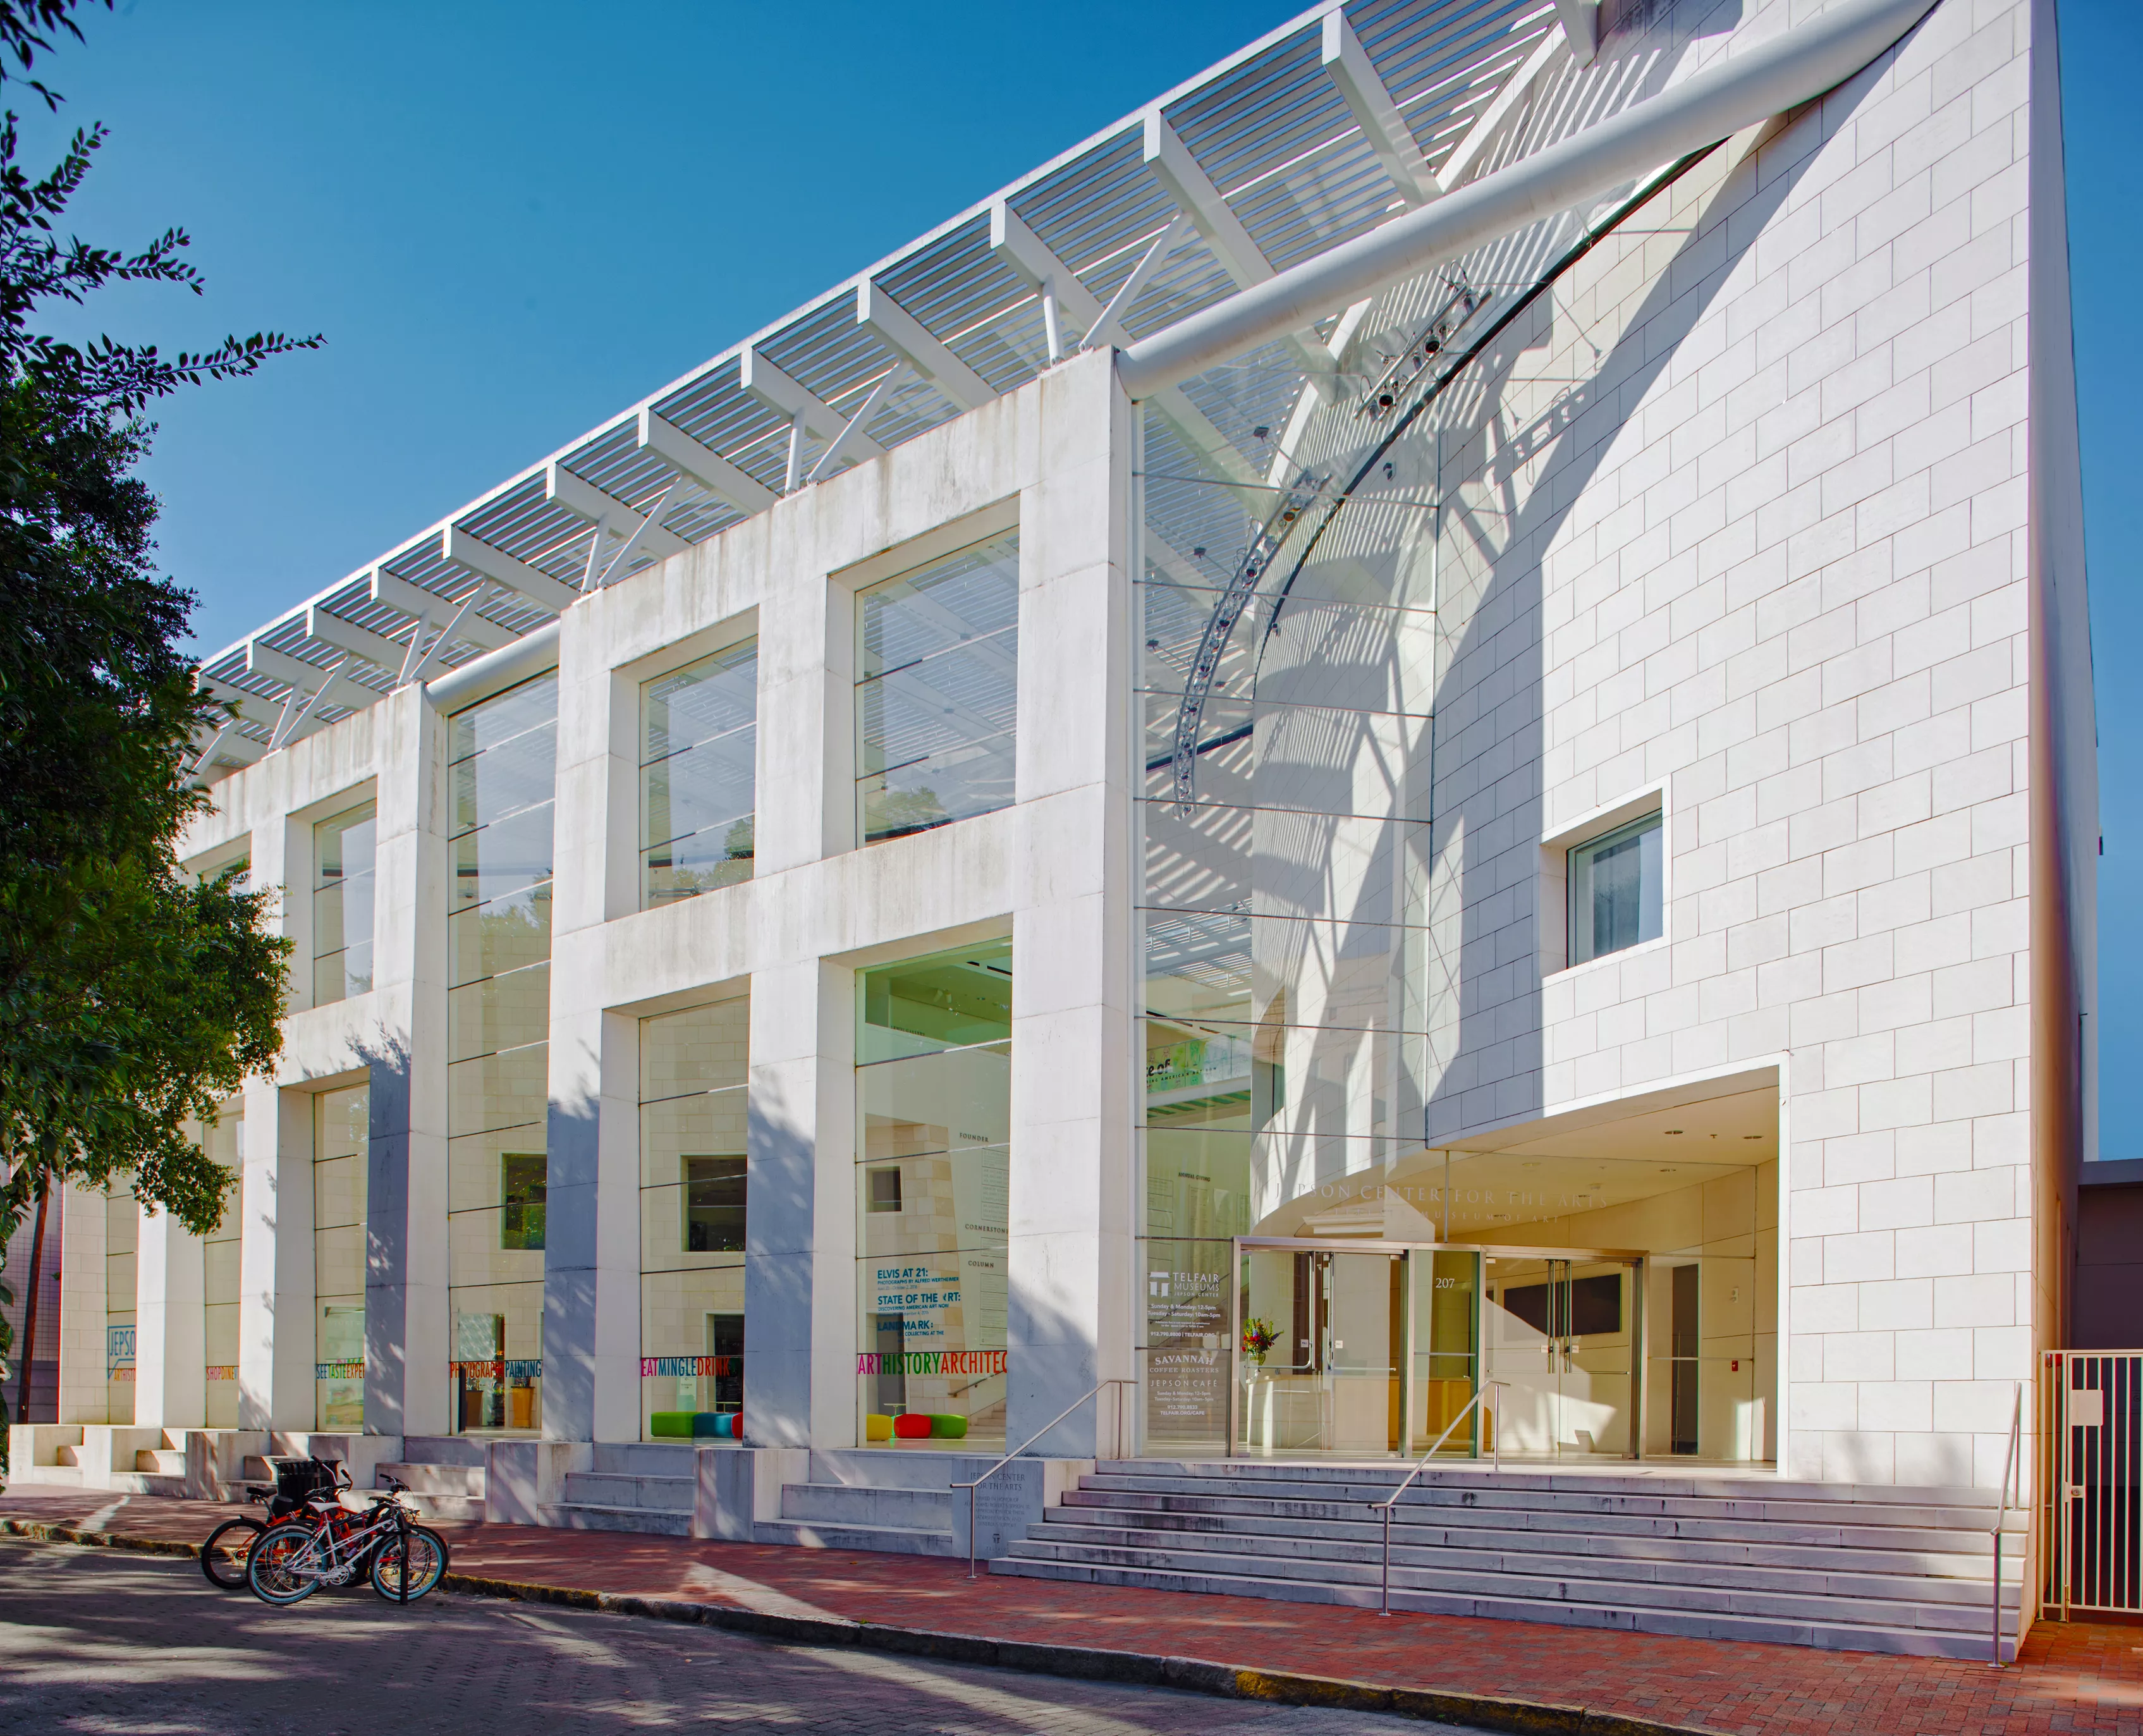 Jepson Center for the Arts in USA, North America | Art Galleries - Rated 3.6